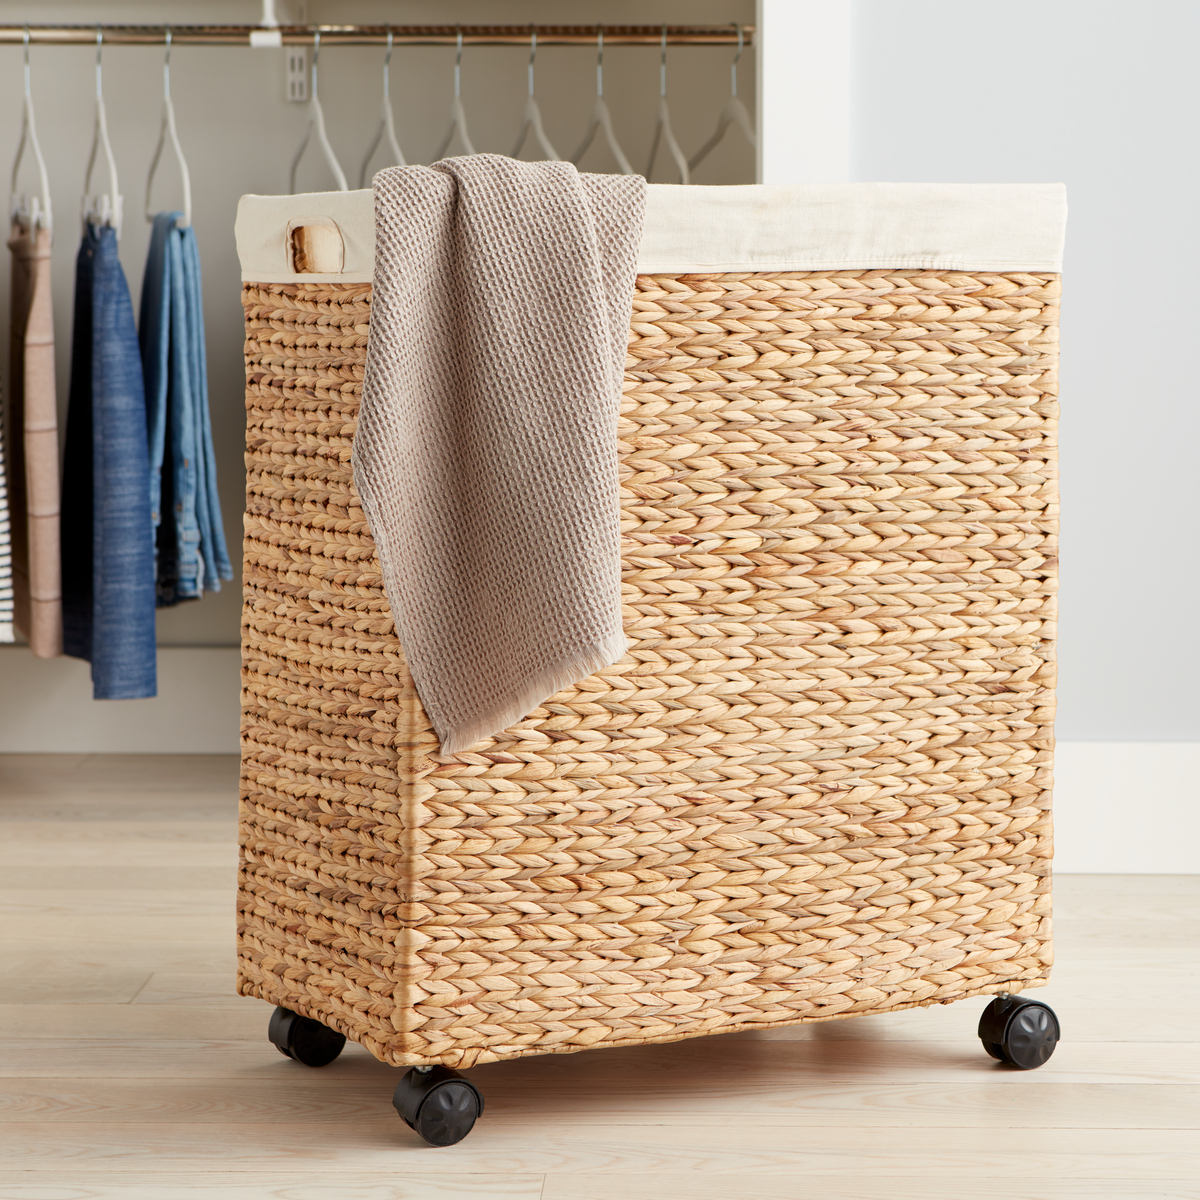 Canvas Laundry Hamper | The Container Store